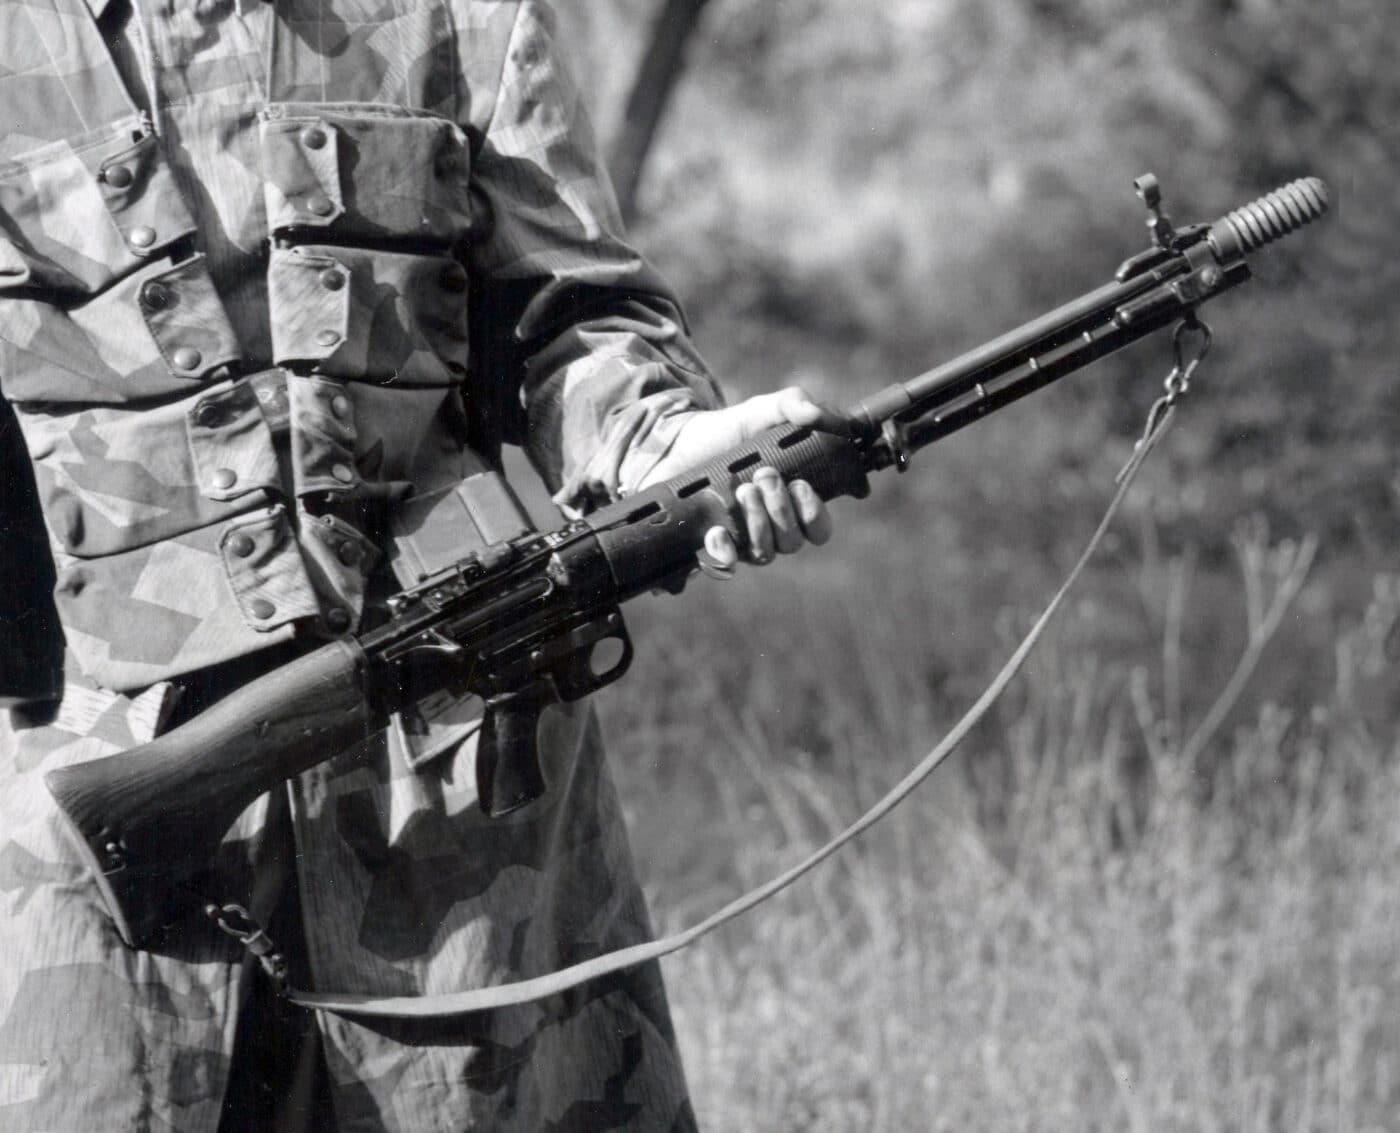 In this photo is a German paratrooper with a FG42 rifle.